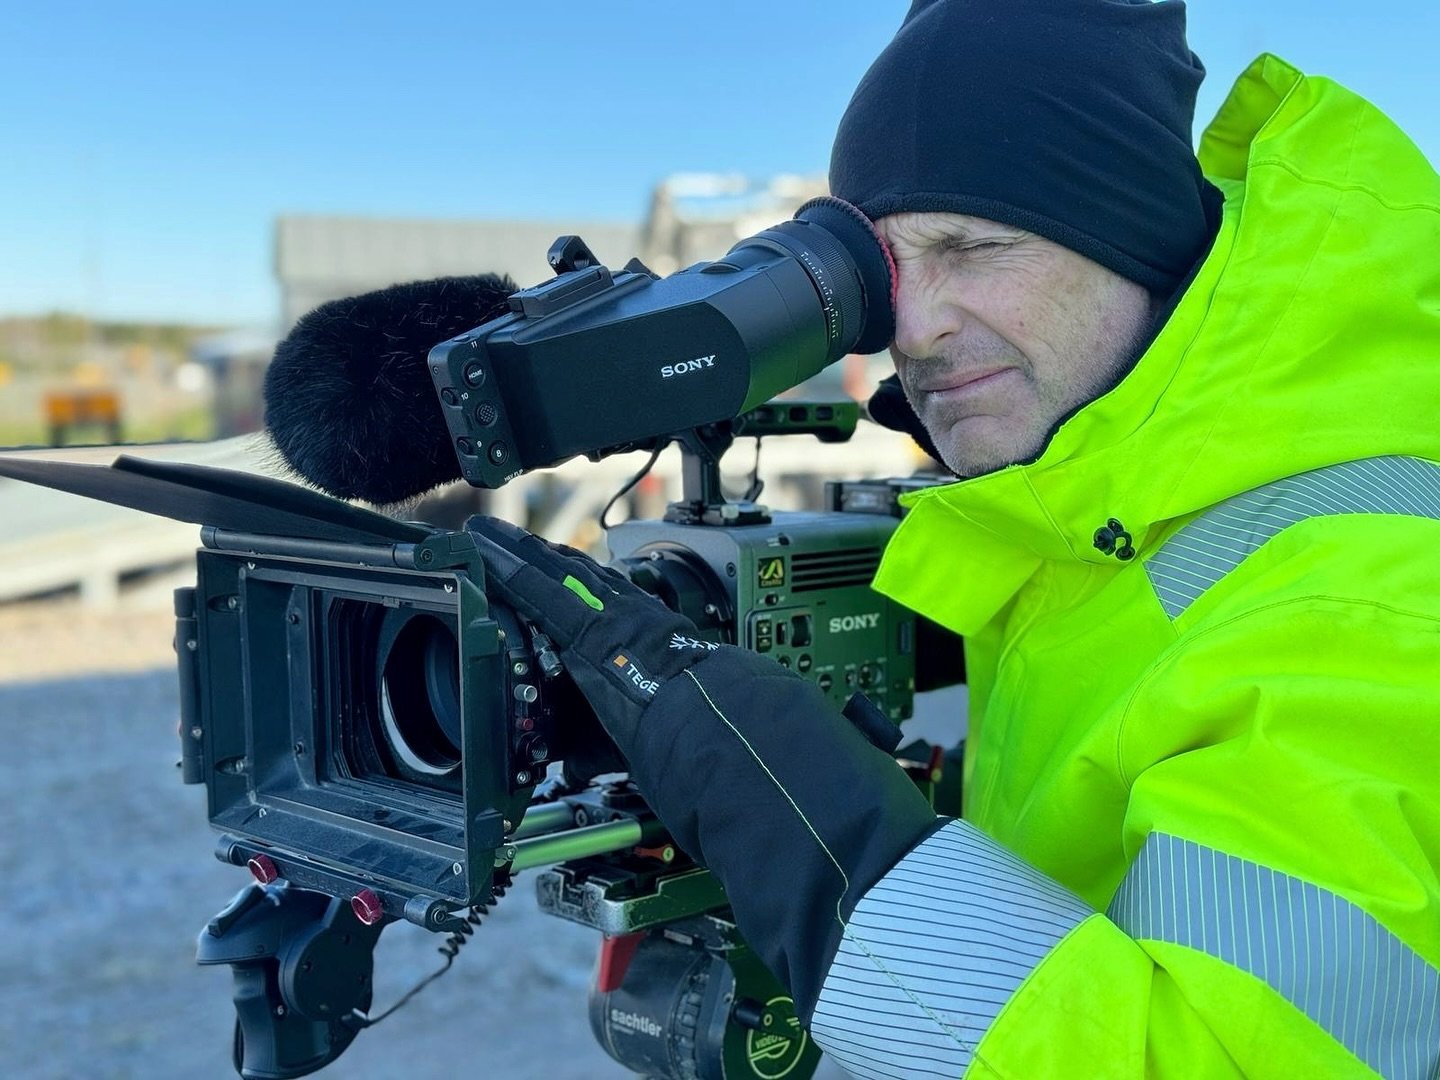 I had the pleasure of shooting the past two days with @magnus_kaka &amp; his new Sony Burano. The camera&rsquo;s first outing. A very nice &amp; capable camera indeed. 

#sonyburano #dpsweden #cameraman 
📸 @magnus_kaka